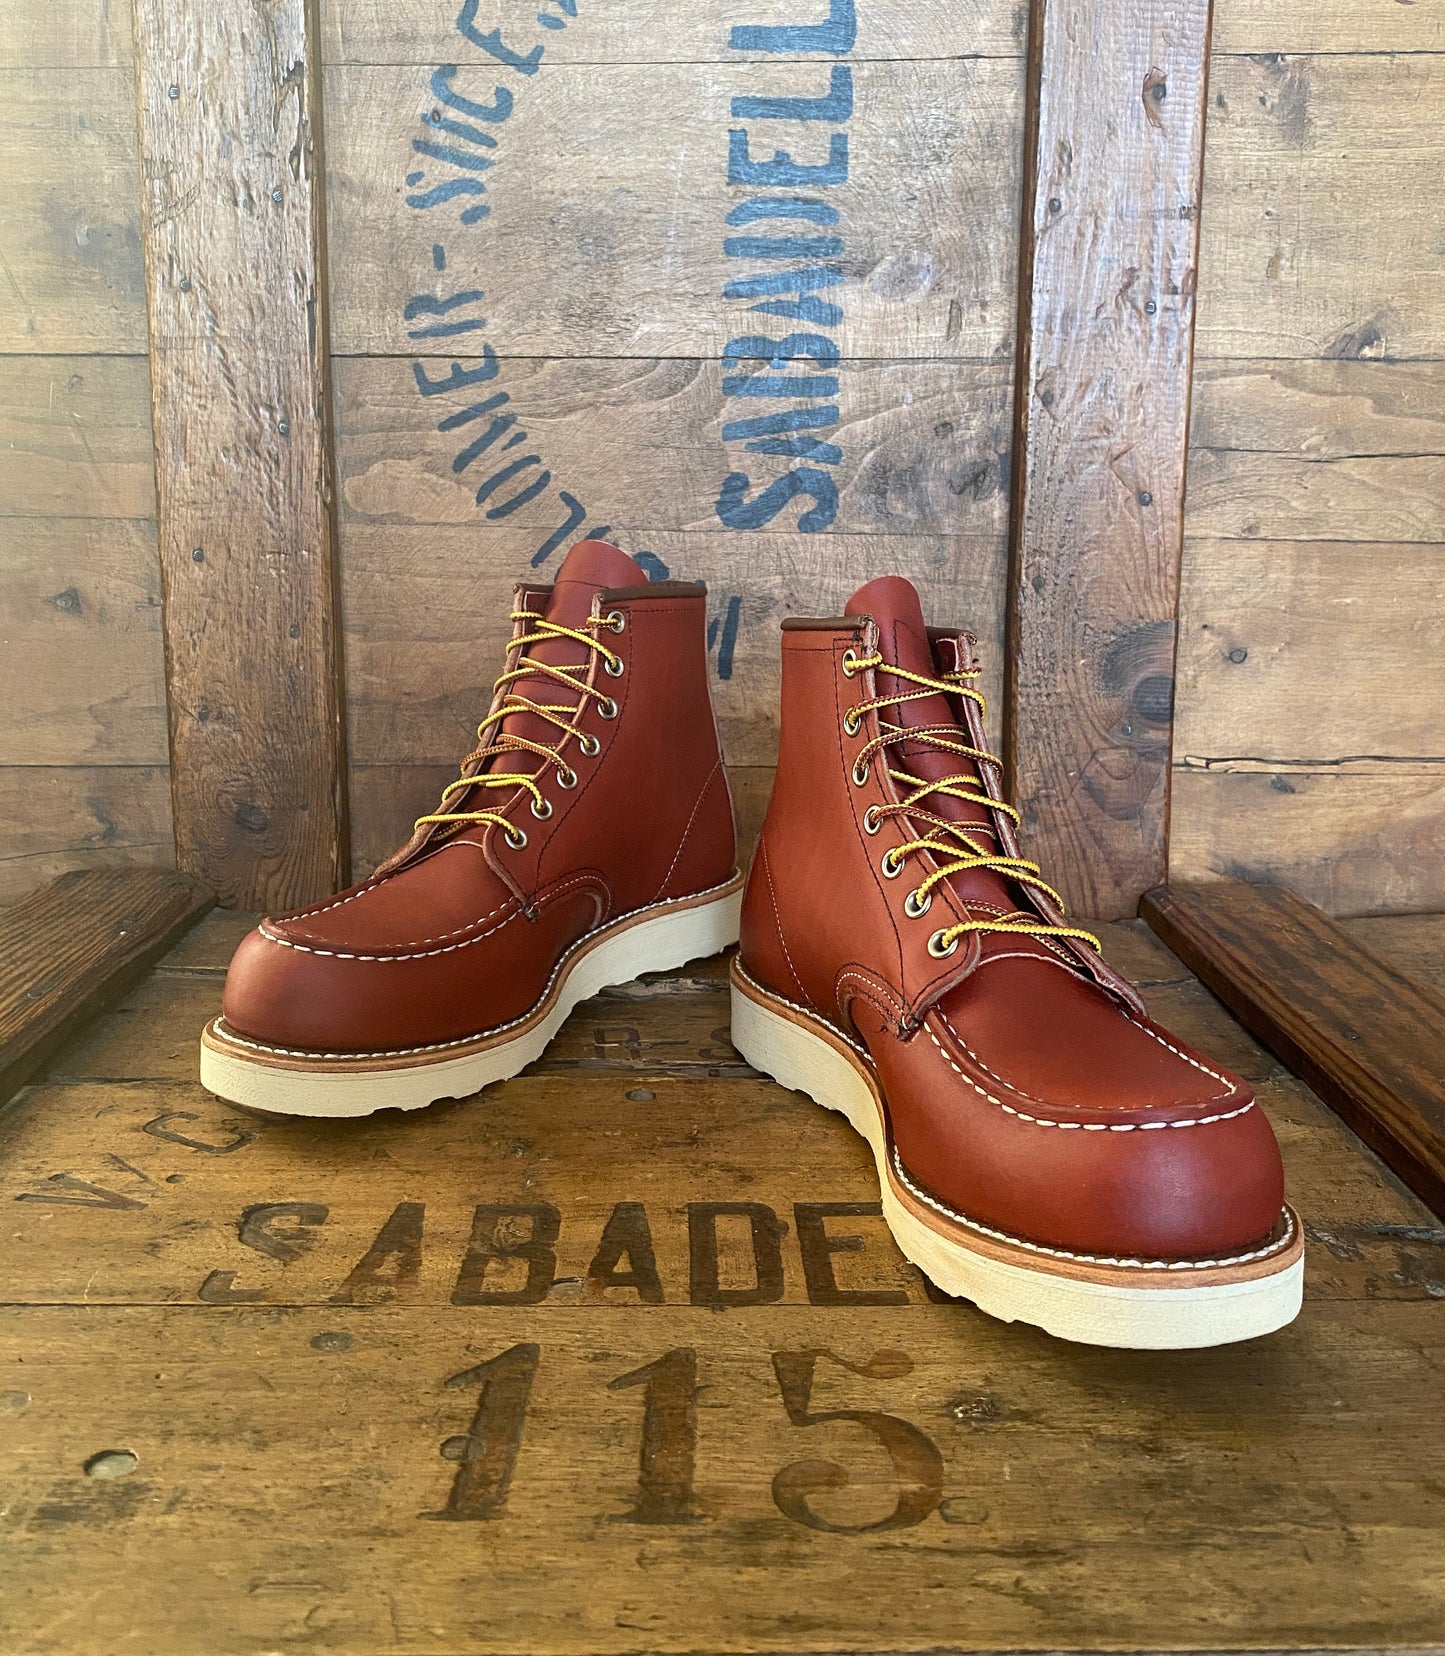 Red Wing 8131 Moc Toe Oro Russet Boots, size 6.5D (38.5 Euro) - front view. Made in USA. Factory seconds.